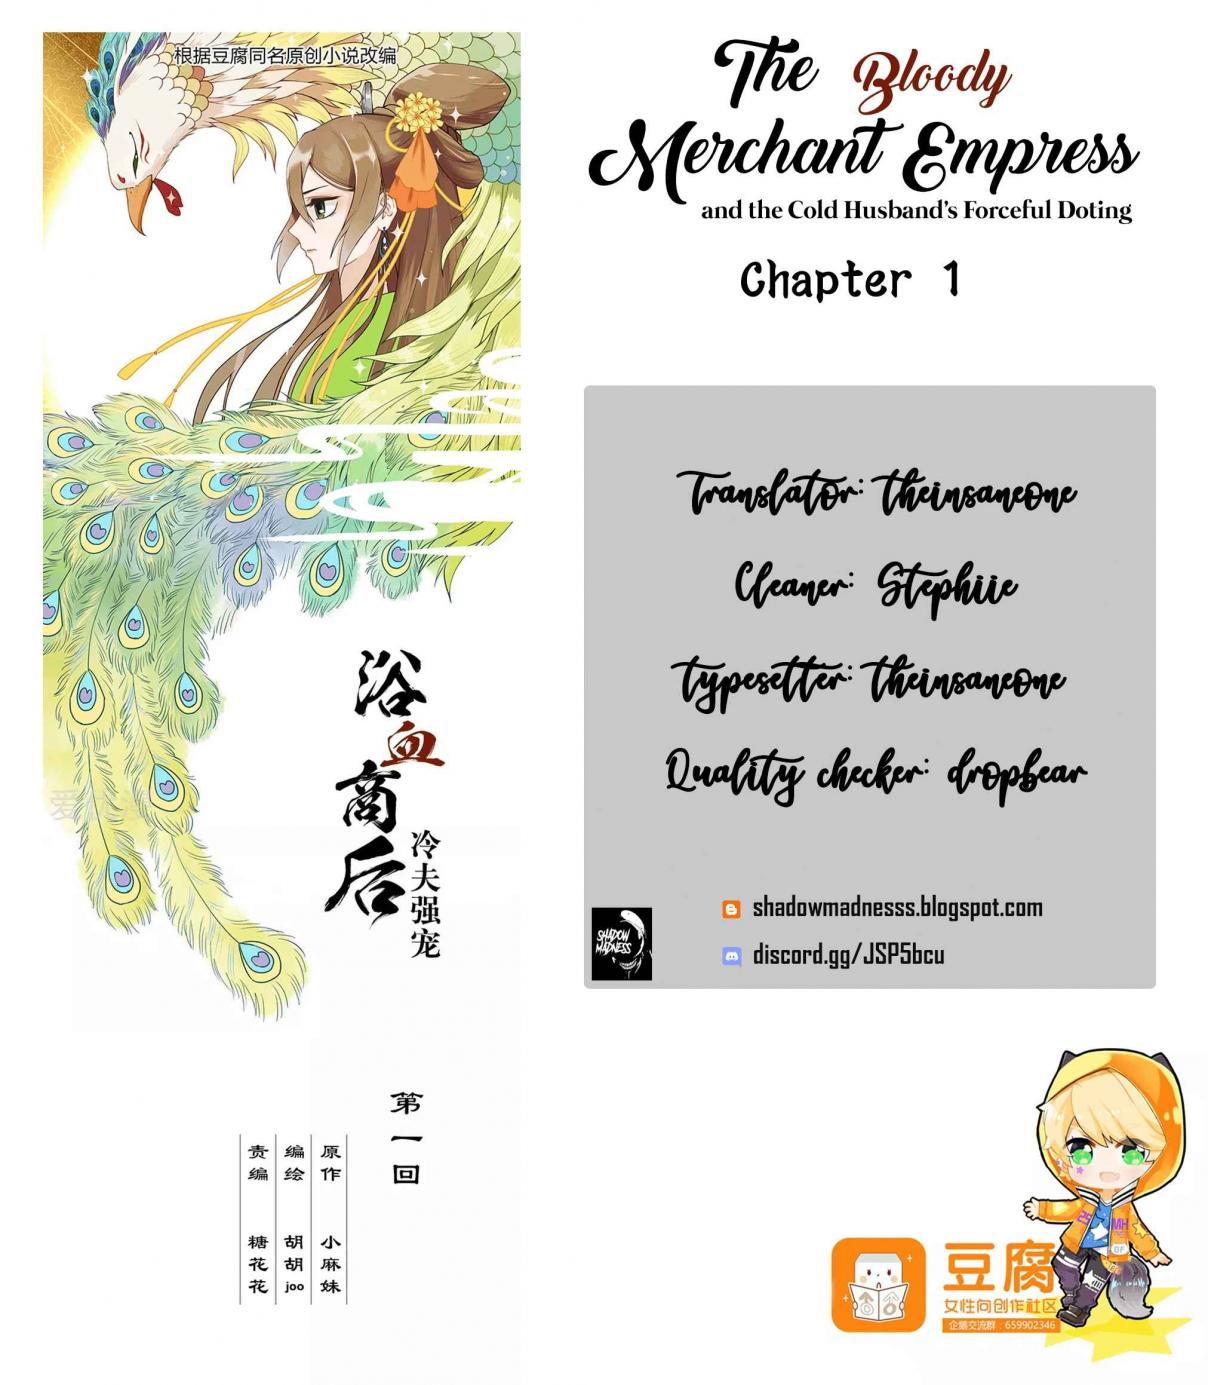 The Bloody Merchant Empress and the Cold Husband's Forceful Doting Ch. 1